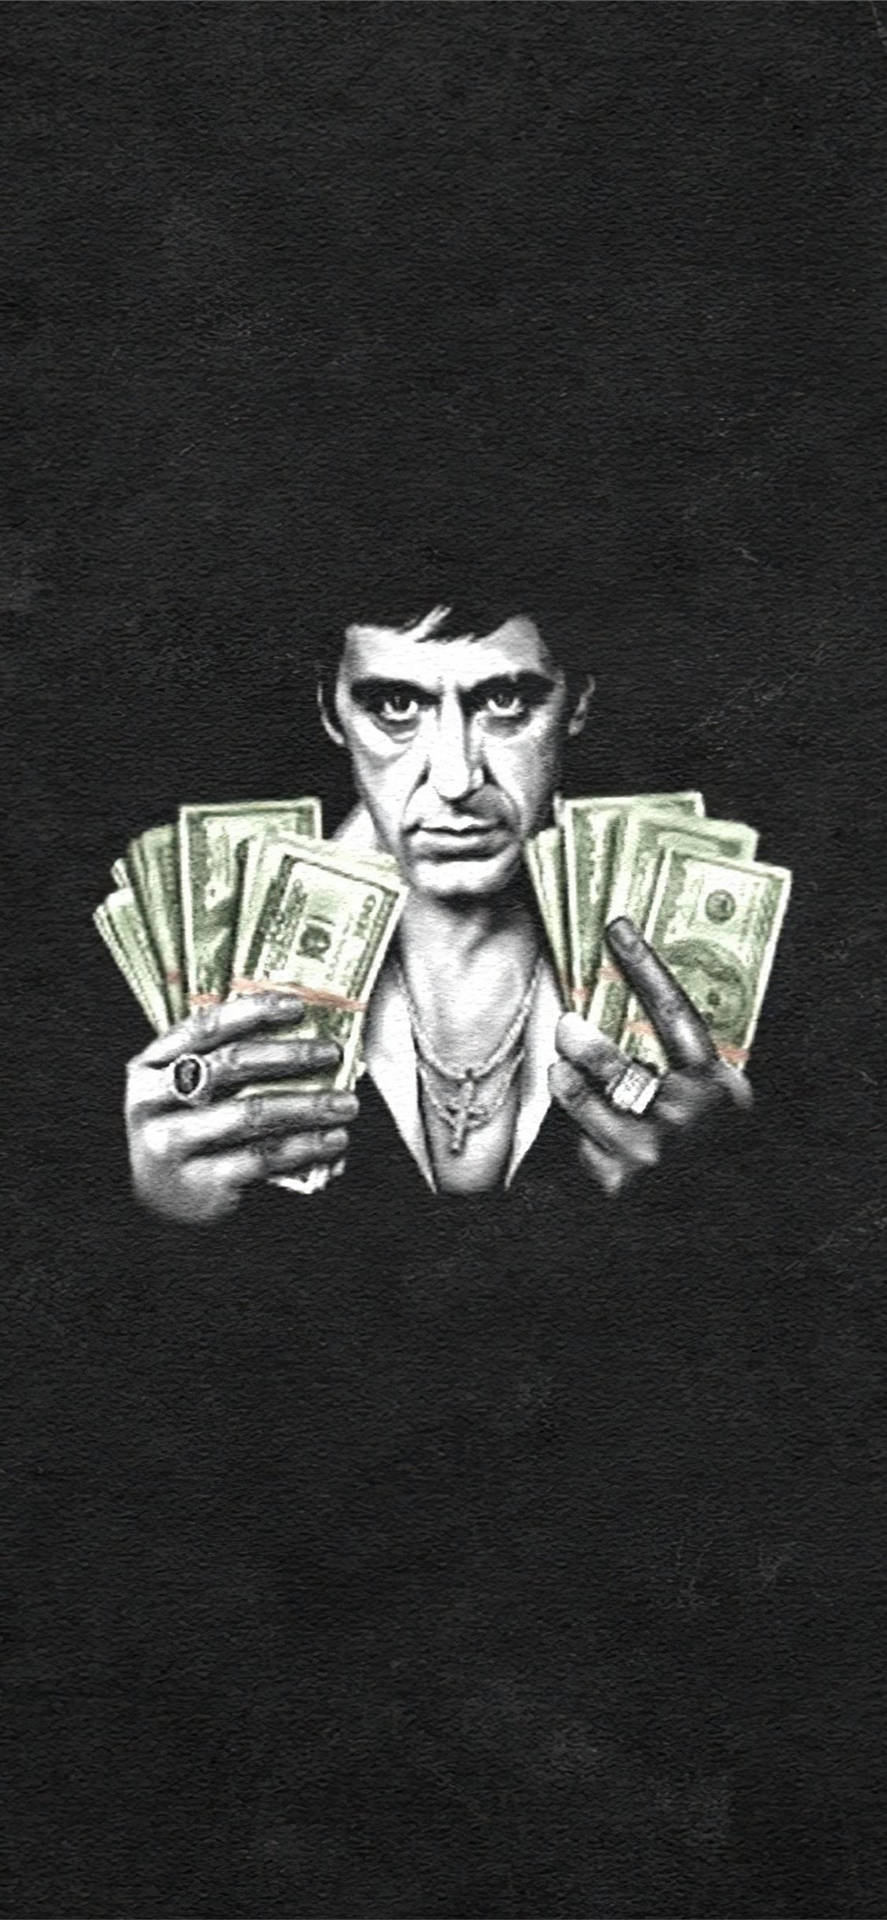 Al Pacino Scarface Wad Of Cash Background